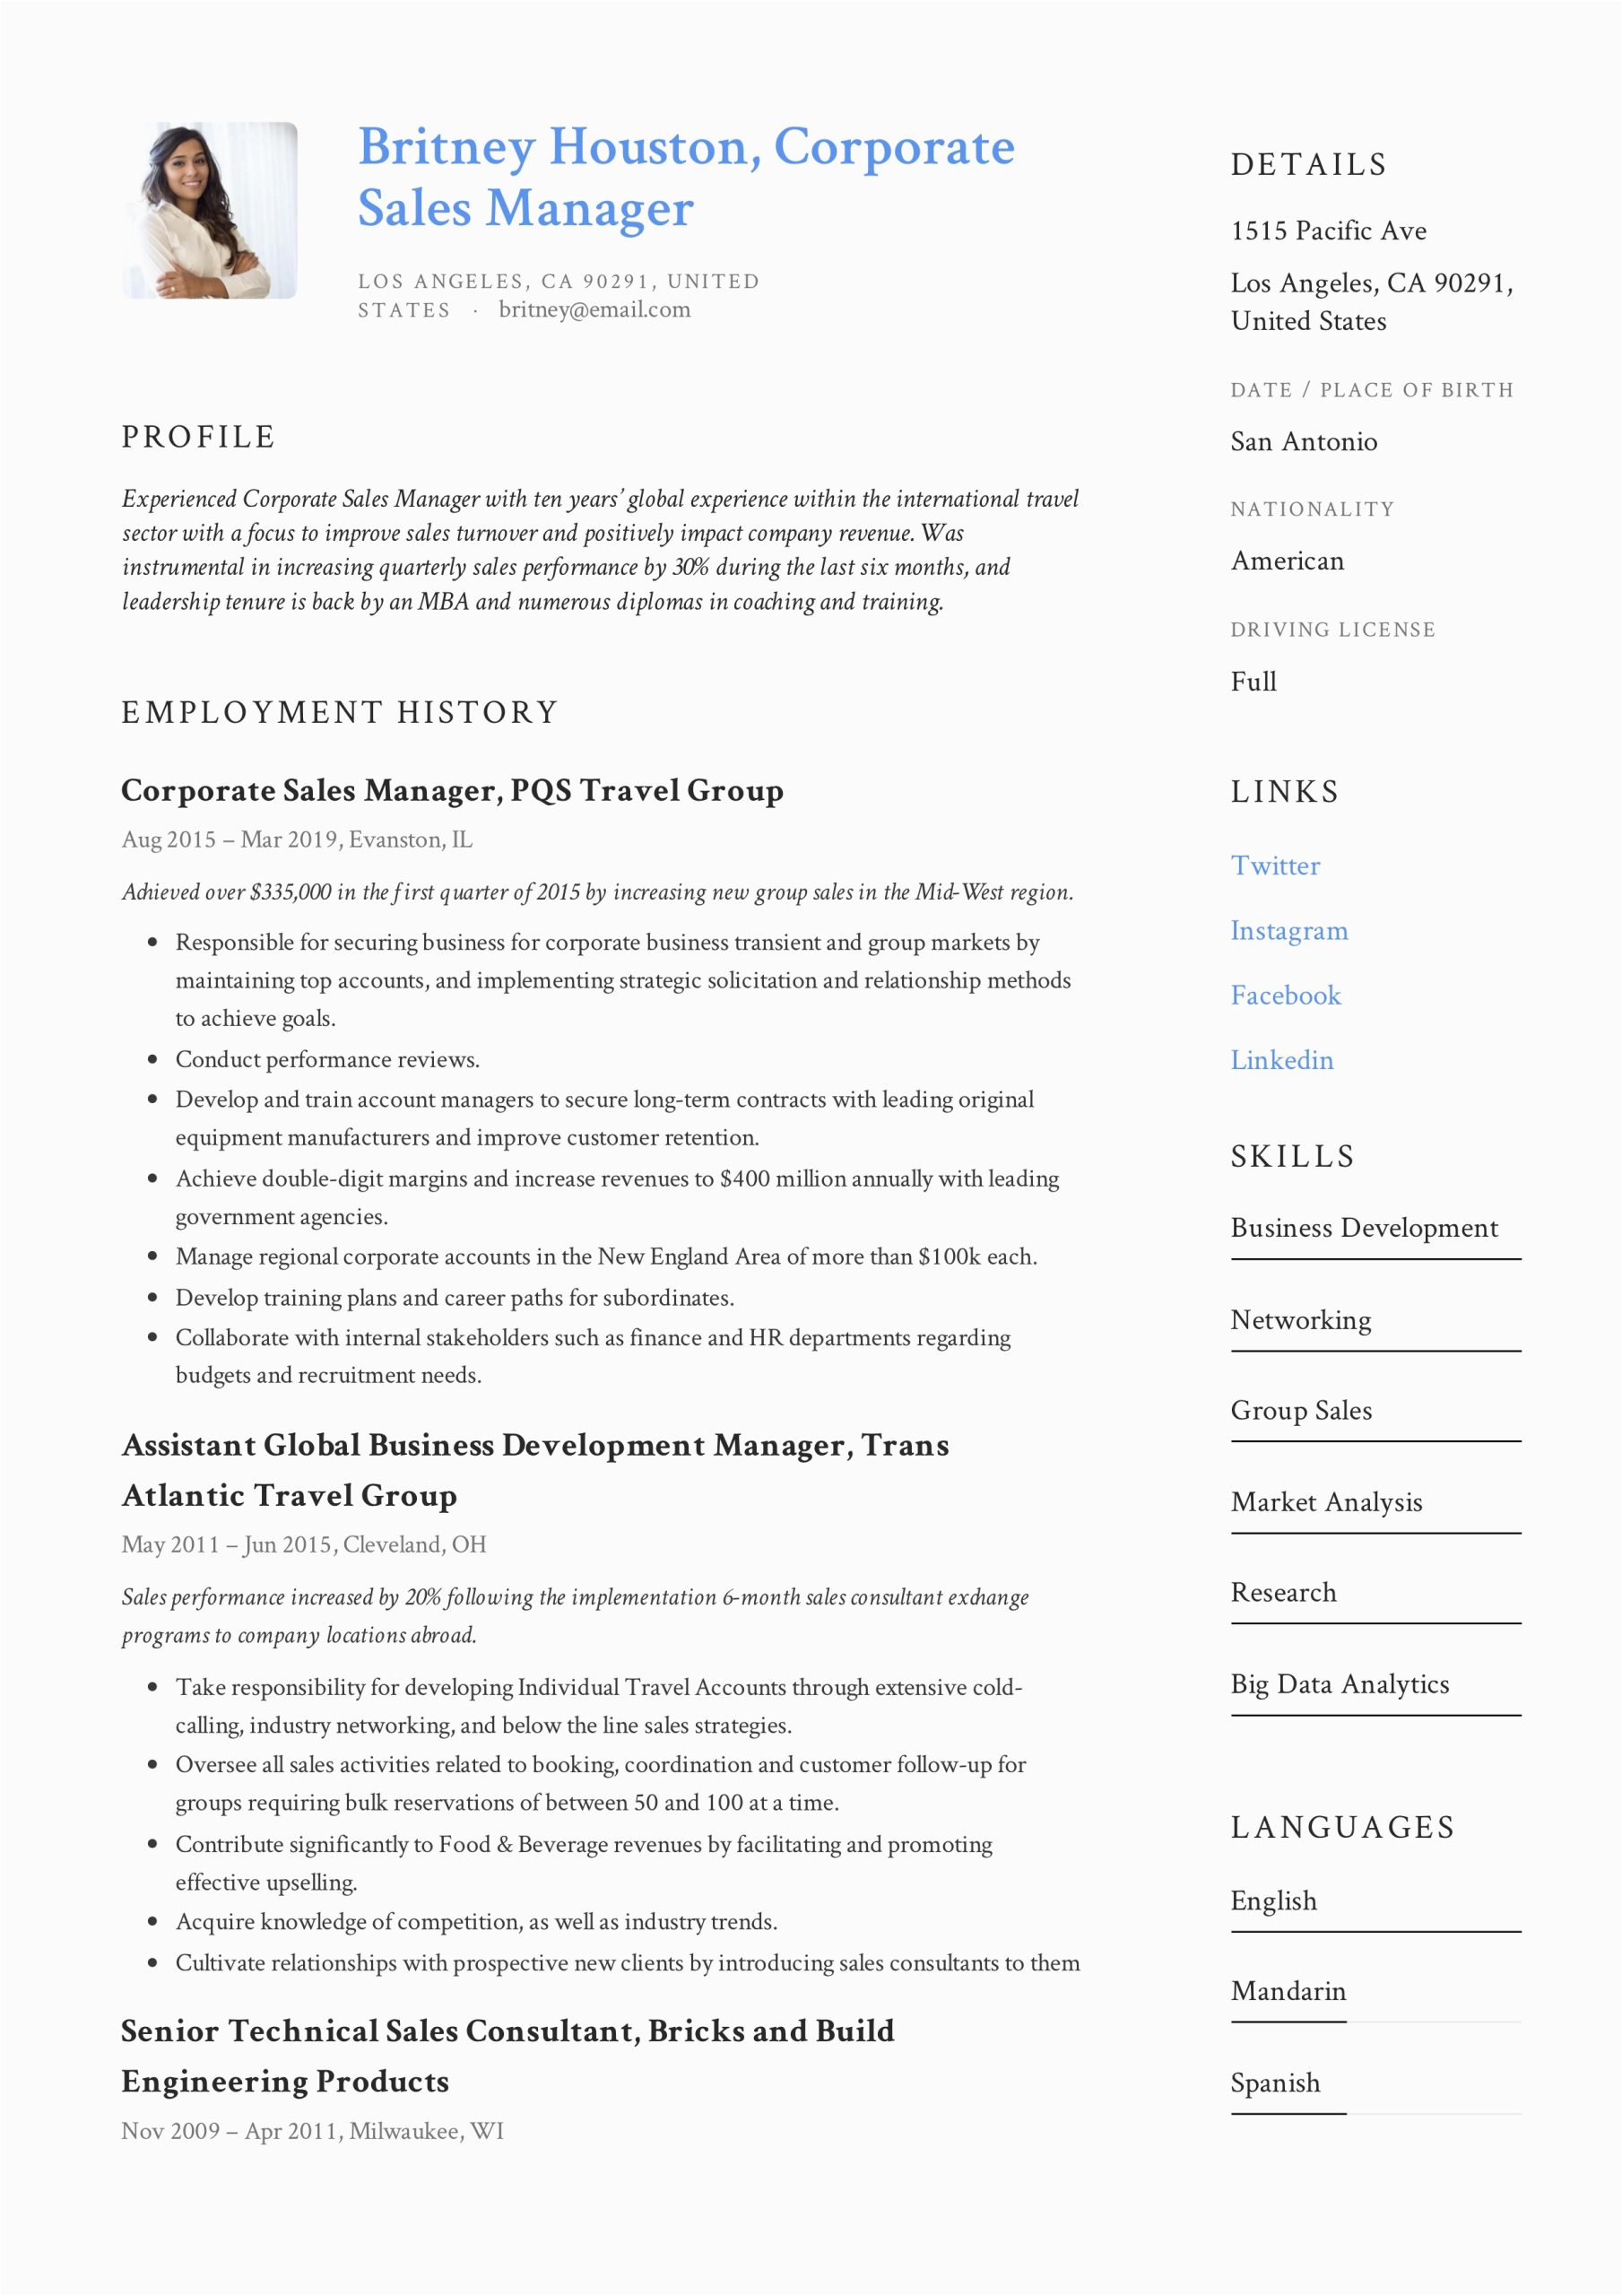 Sample Resume for Sales Manager Job Corporate Sales Manager Resume & Writing Guide